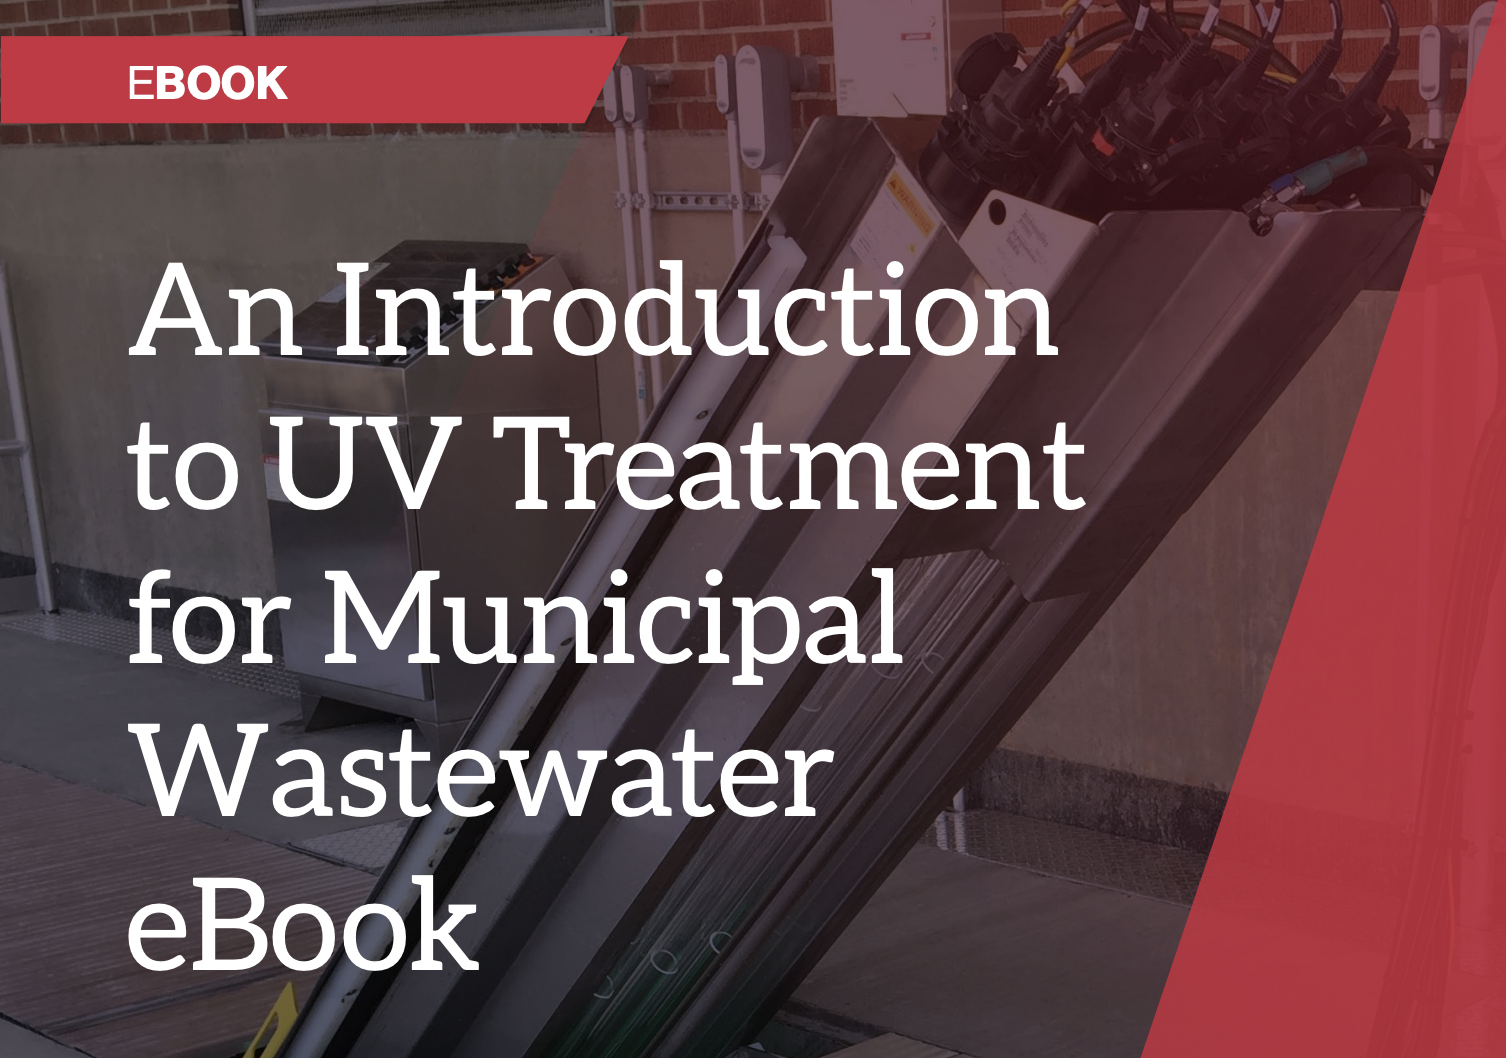 Our municipal wastewater eBook is now available